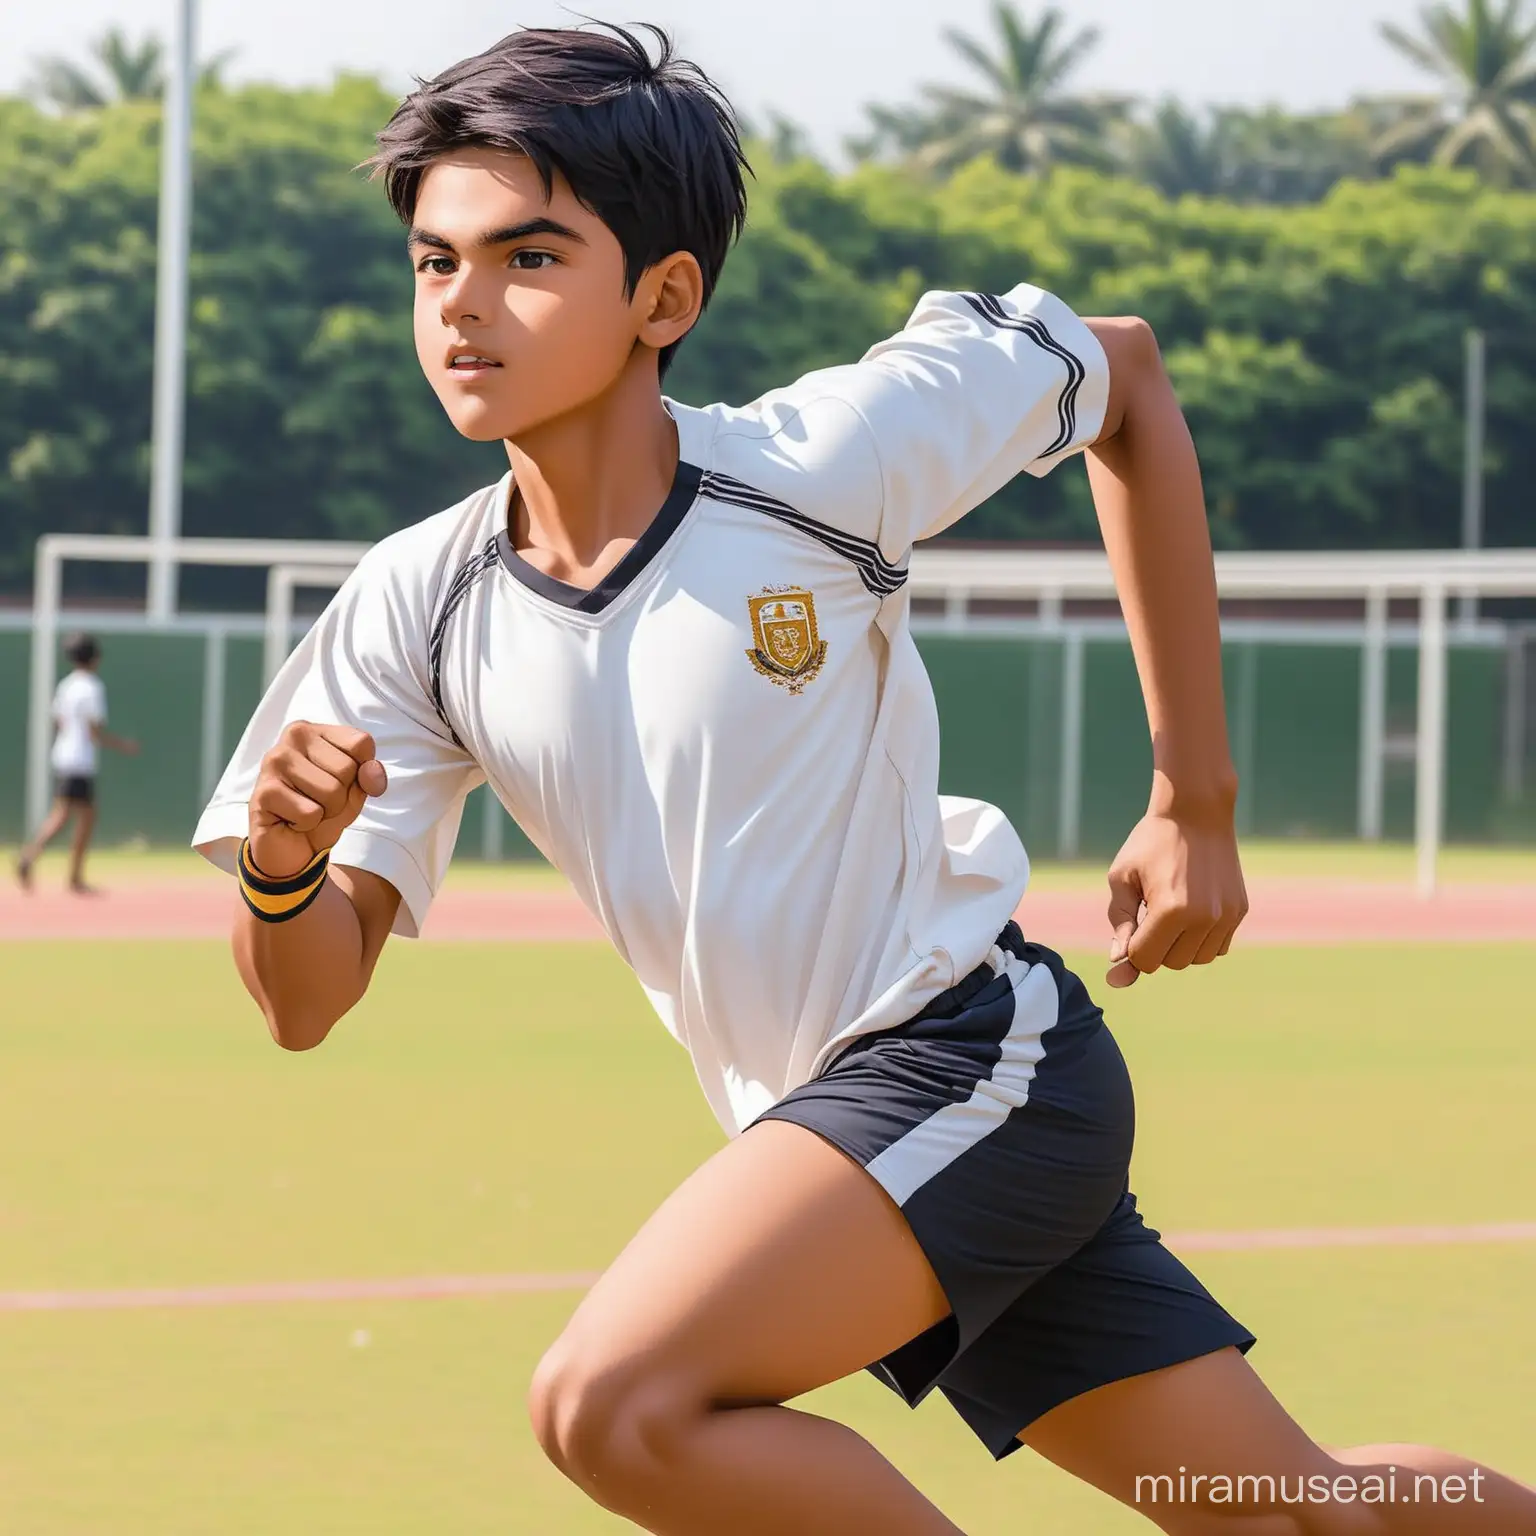 Indian School Boy Participating in Sports Activity